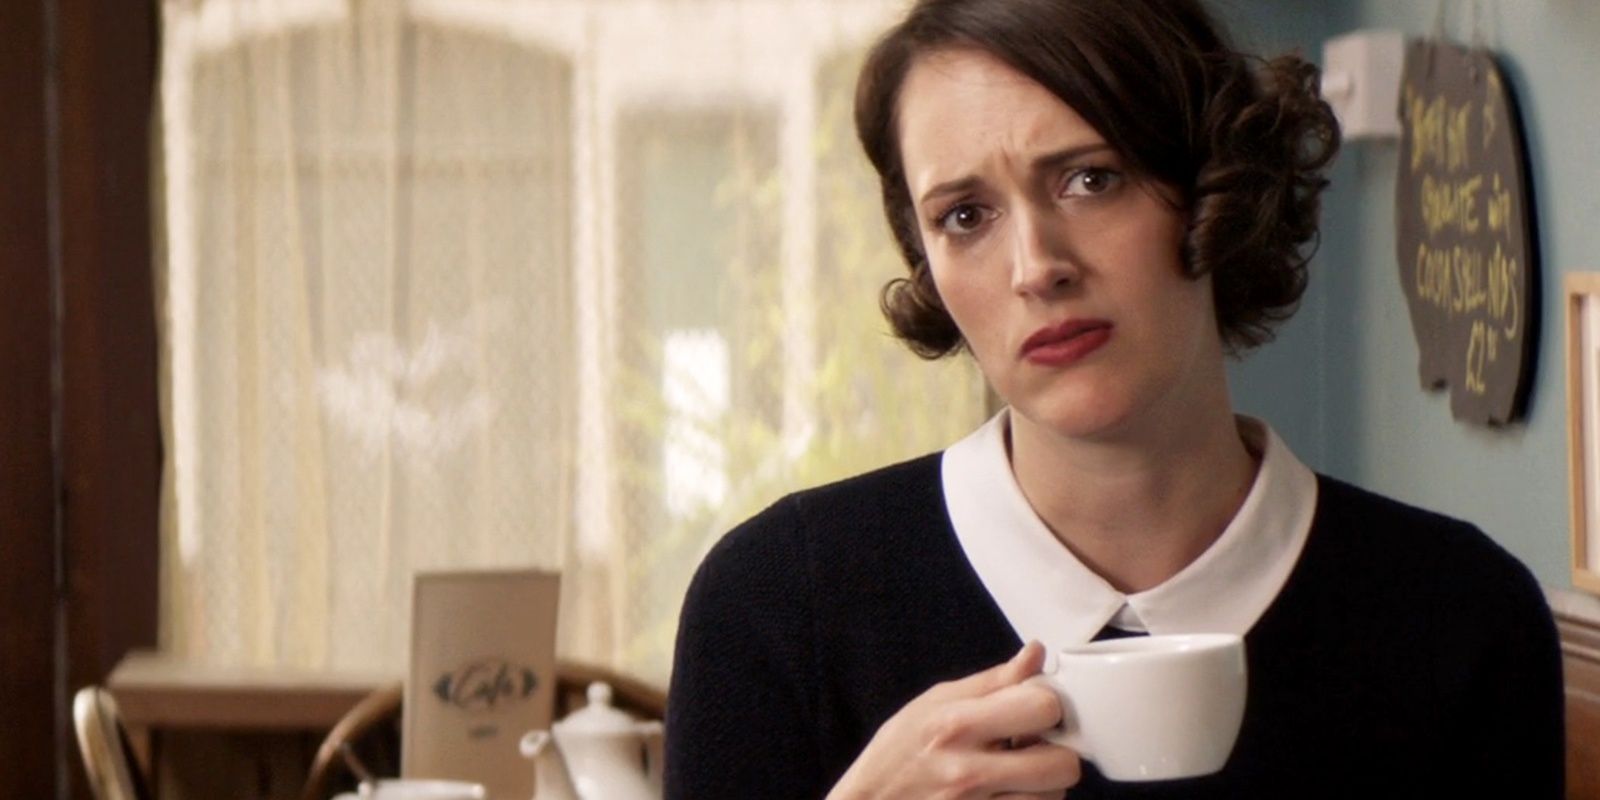 Phoebe Waller-Bridge sitting with cup in hand annoyed expression in amazon prime series Fleabag